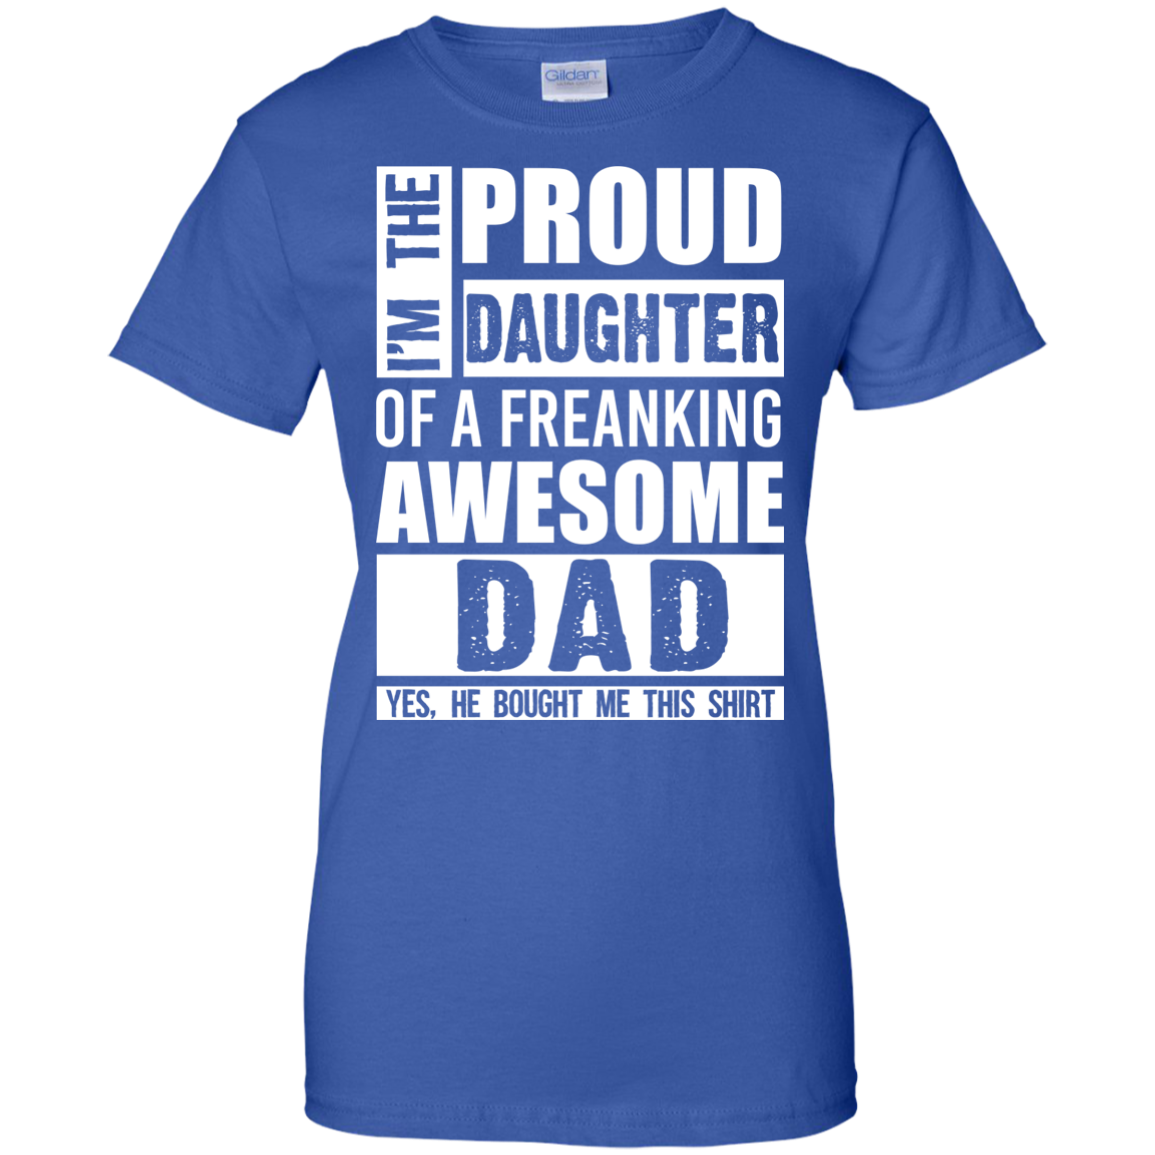 Proud Of Dad Of An Awesome Daughter Colorado Rockies T Shirts - Limotees